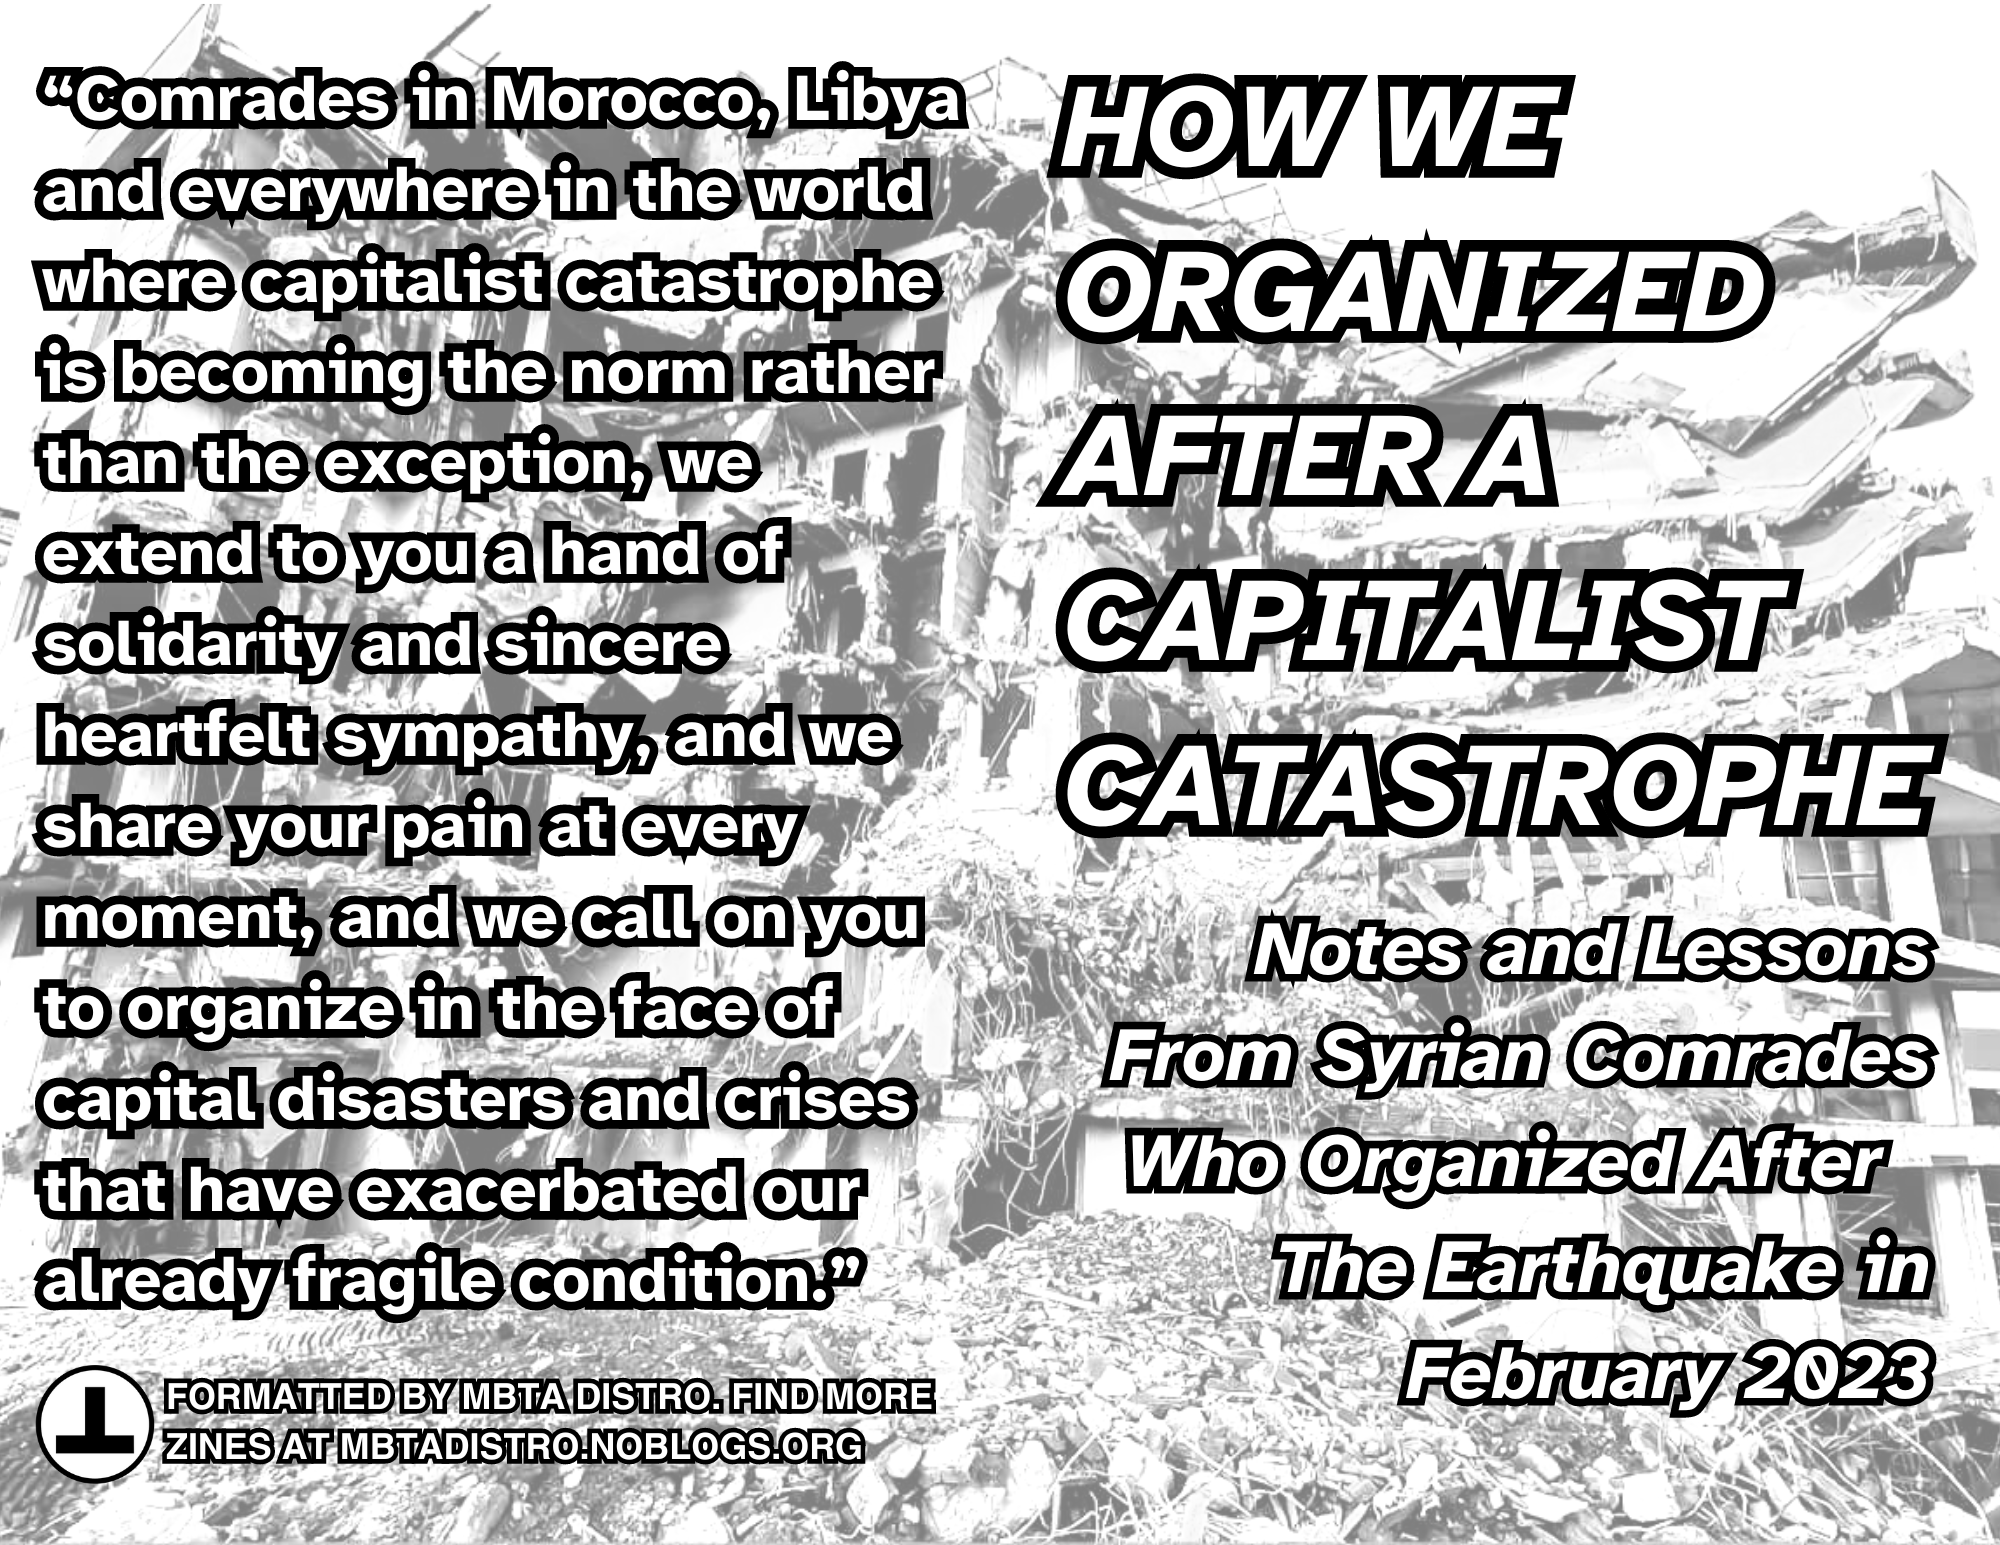 New Zine: How We Organized After A Capitalist Catastrophe